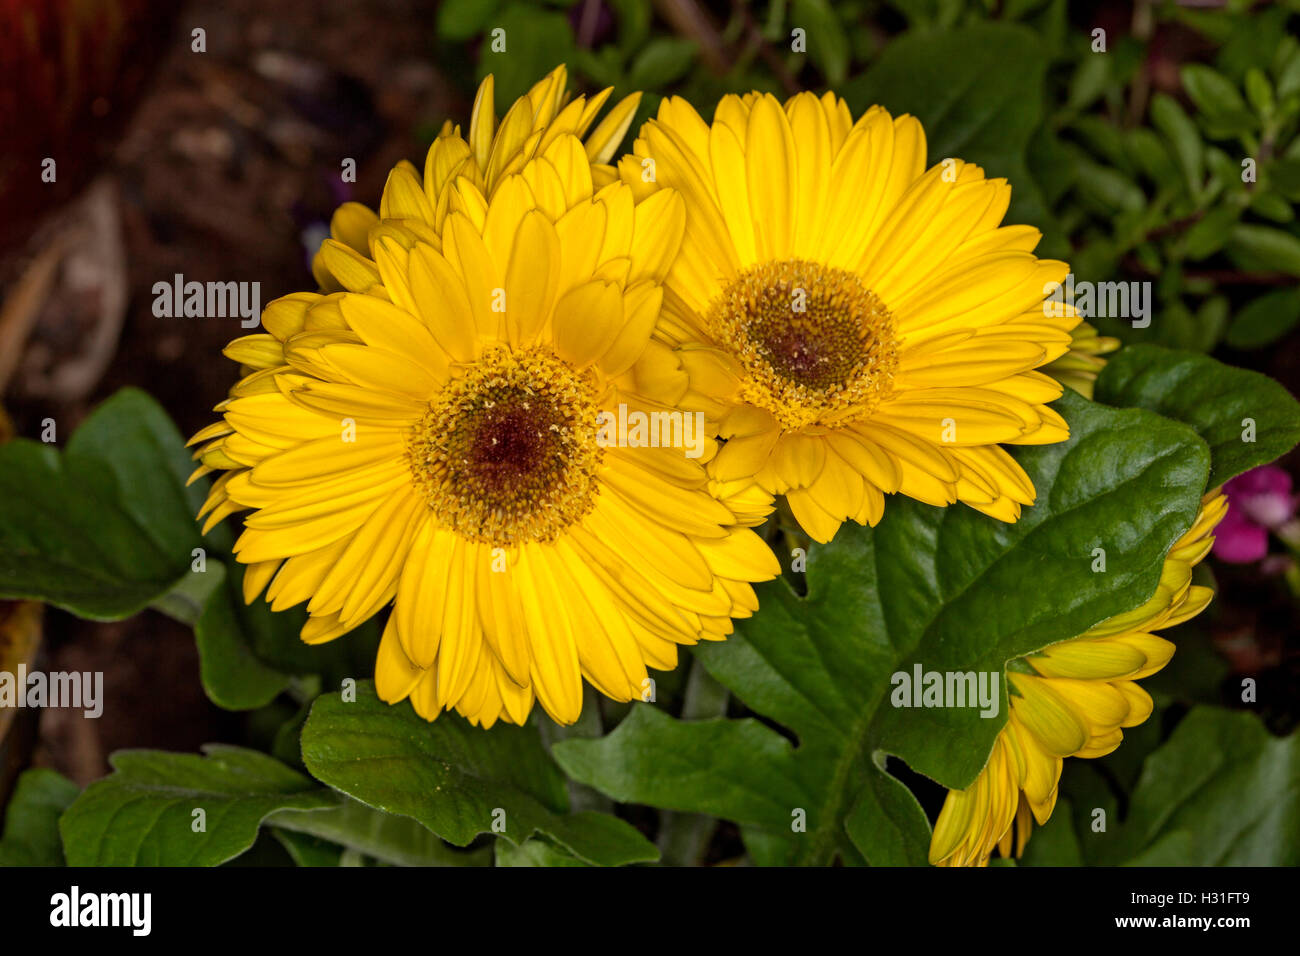 Cluster of vivid yellow flowers and dark green leaves of Gerbera jamesonii, perennial plant growing in a garden Stock Photo